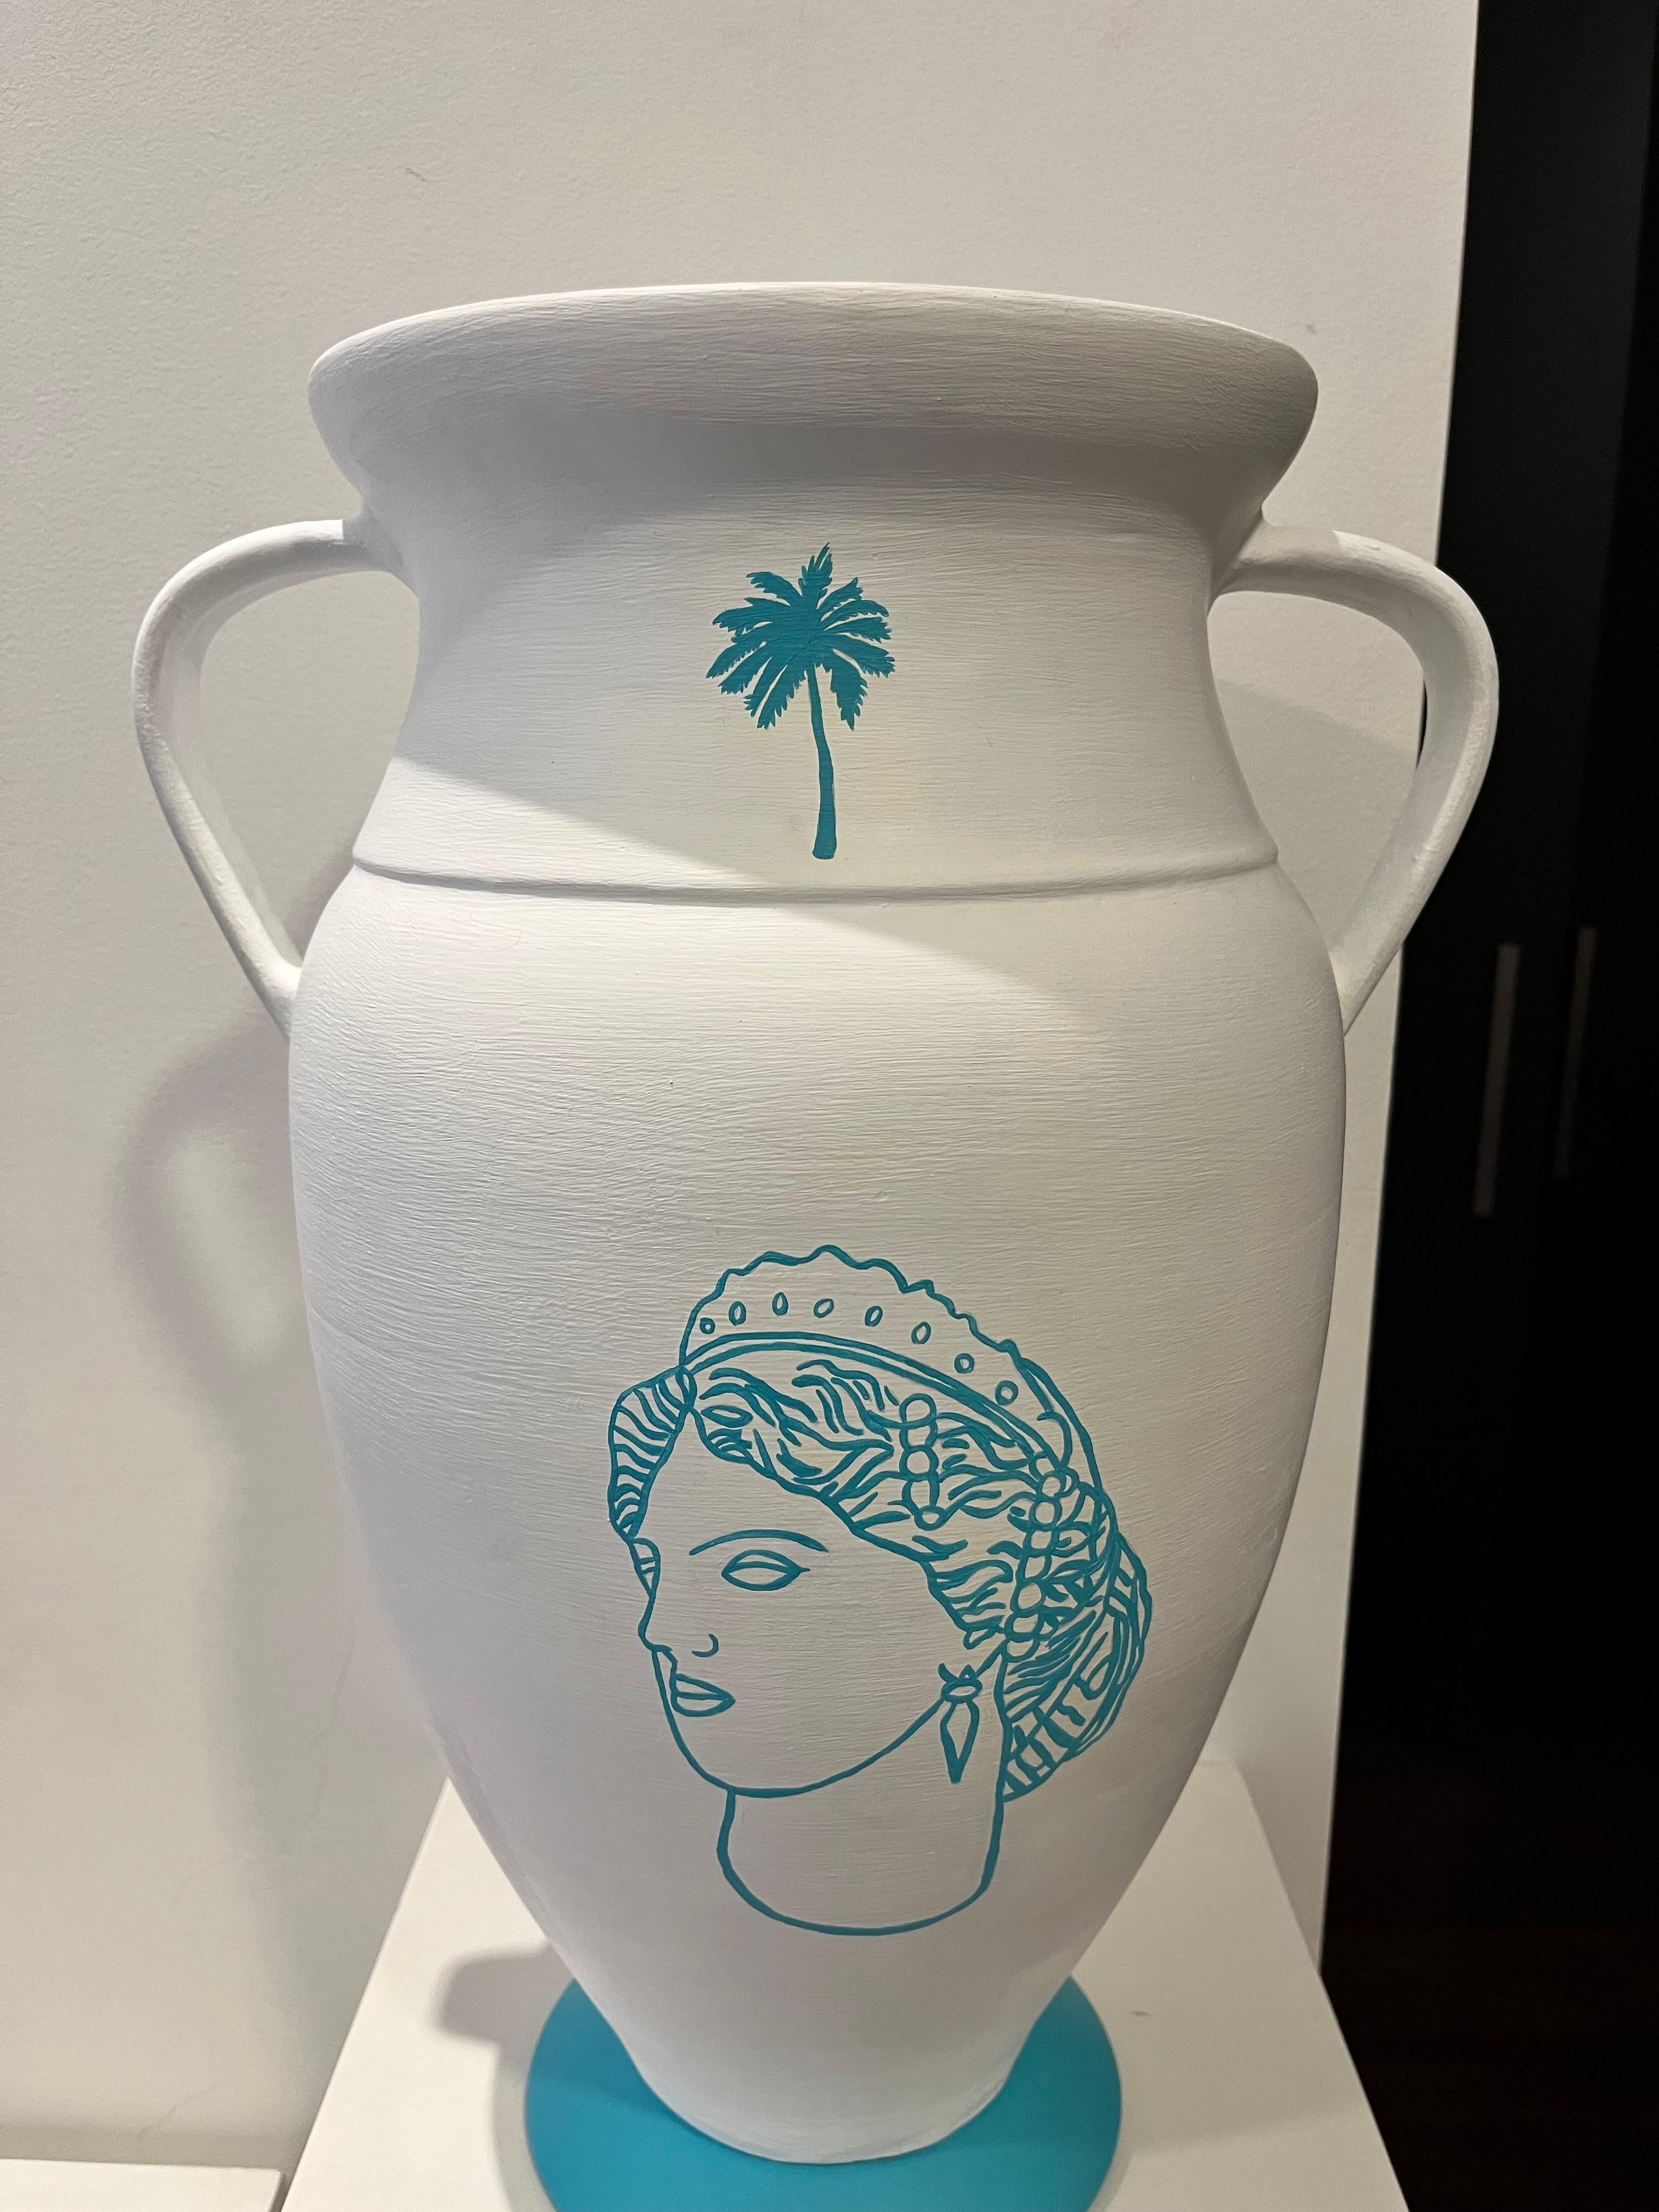 Goddess Circe, Amphora, 2023  Paloma Castello 
From the series Gynaeceum
Hand painted ceramic
Height : 51 cm
Width : 34.5 cm 
Opening Width: 25 cm 
Base Width: : 19 cm

Gineco (Gynaecium)
Two of the recurring themes in Paloma Castello's work